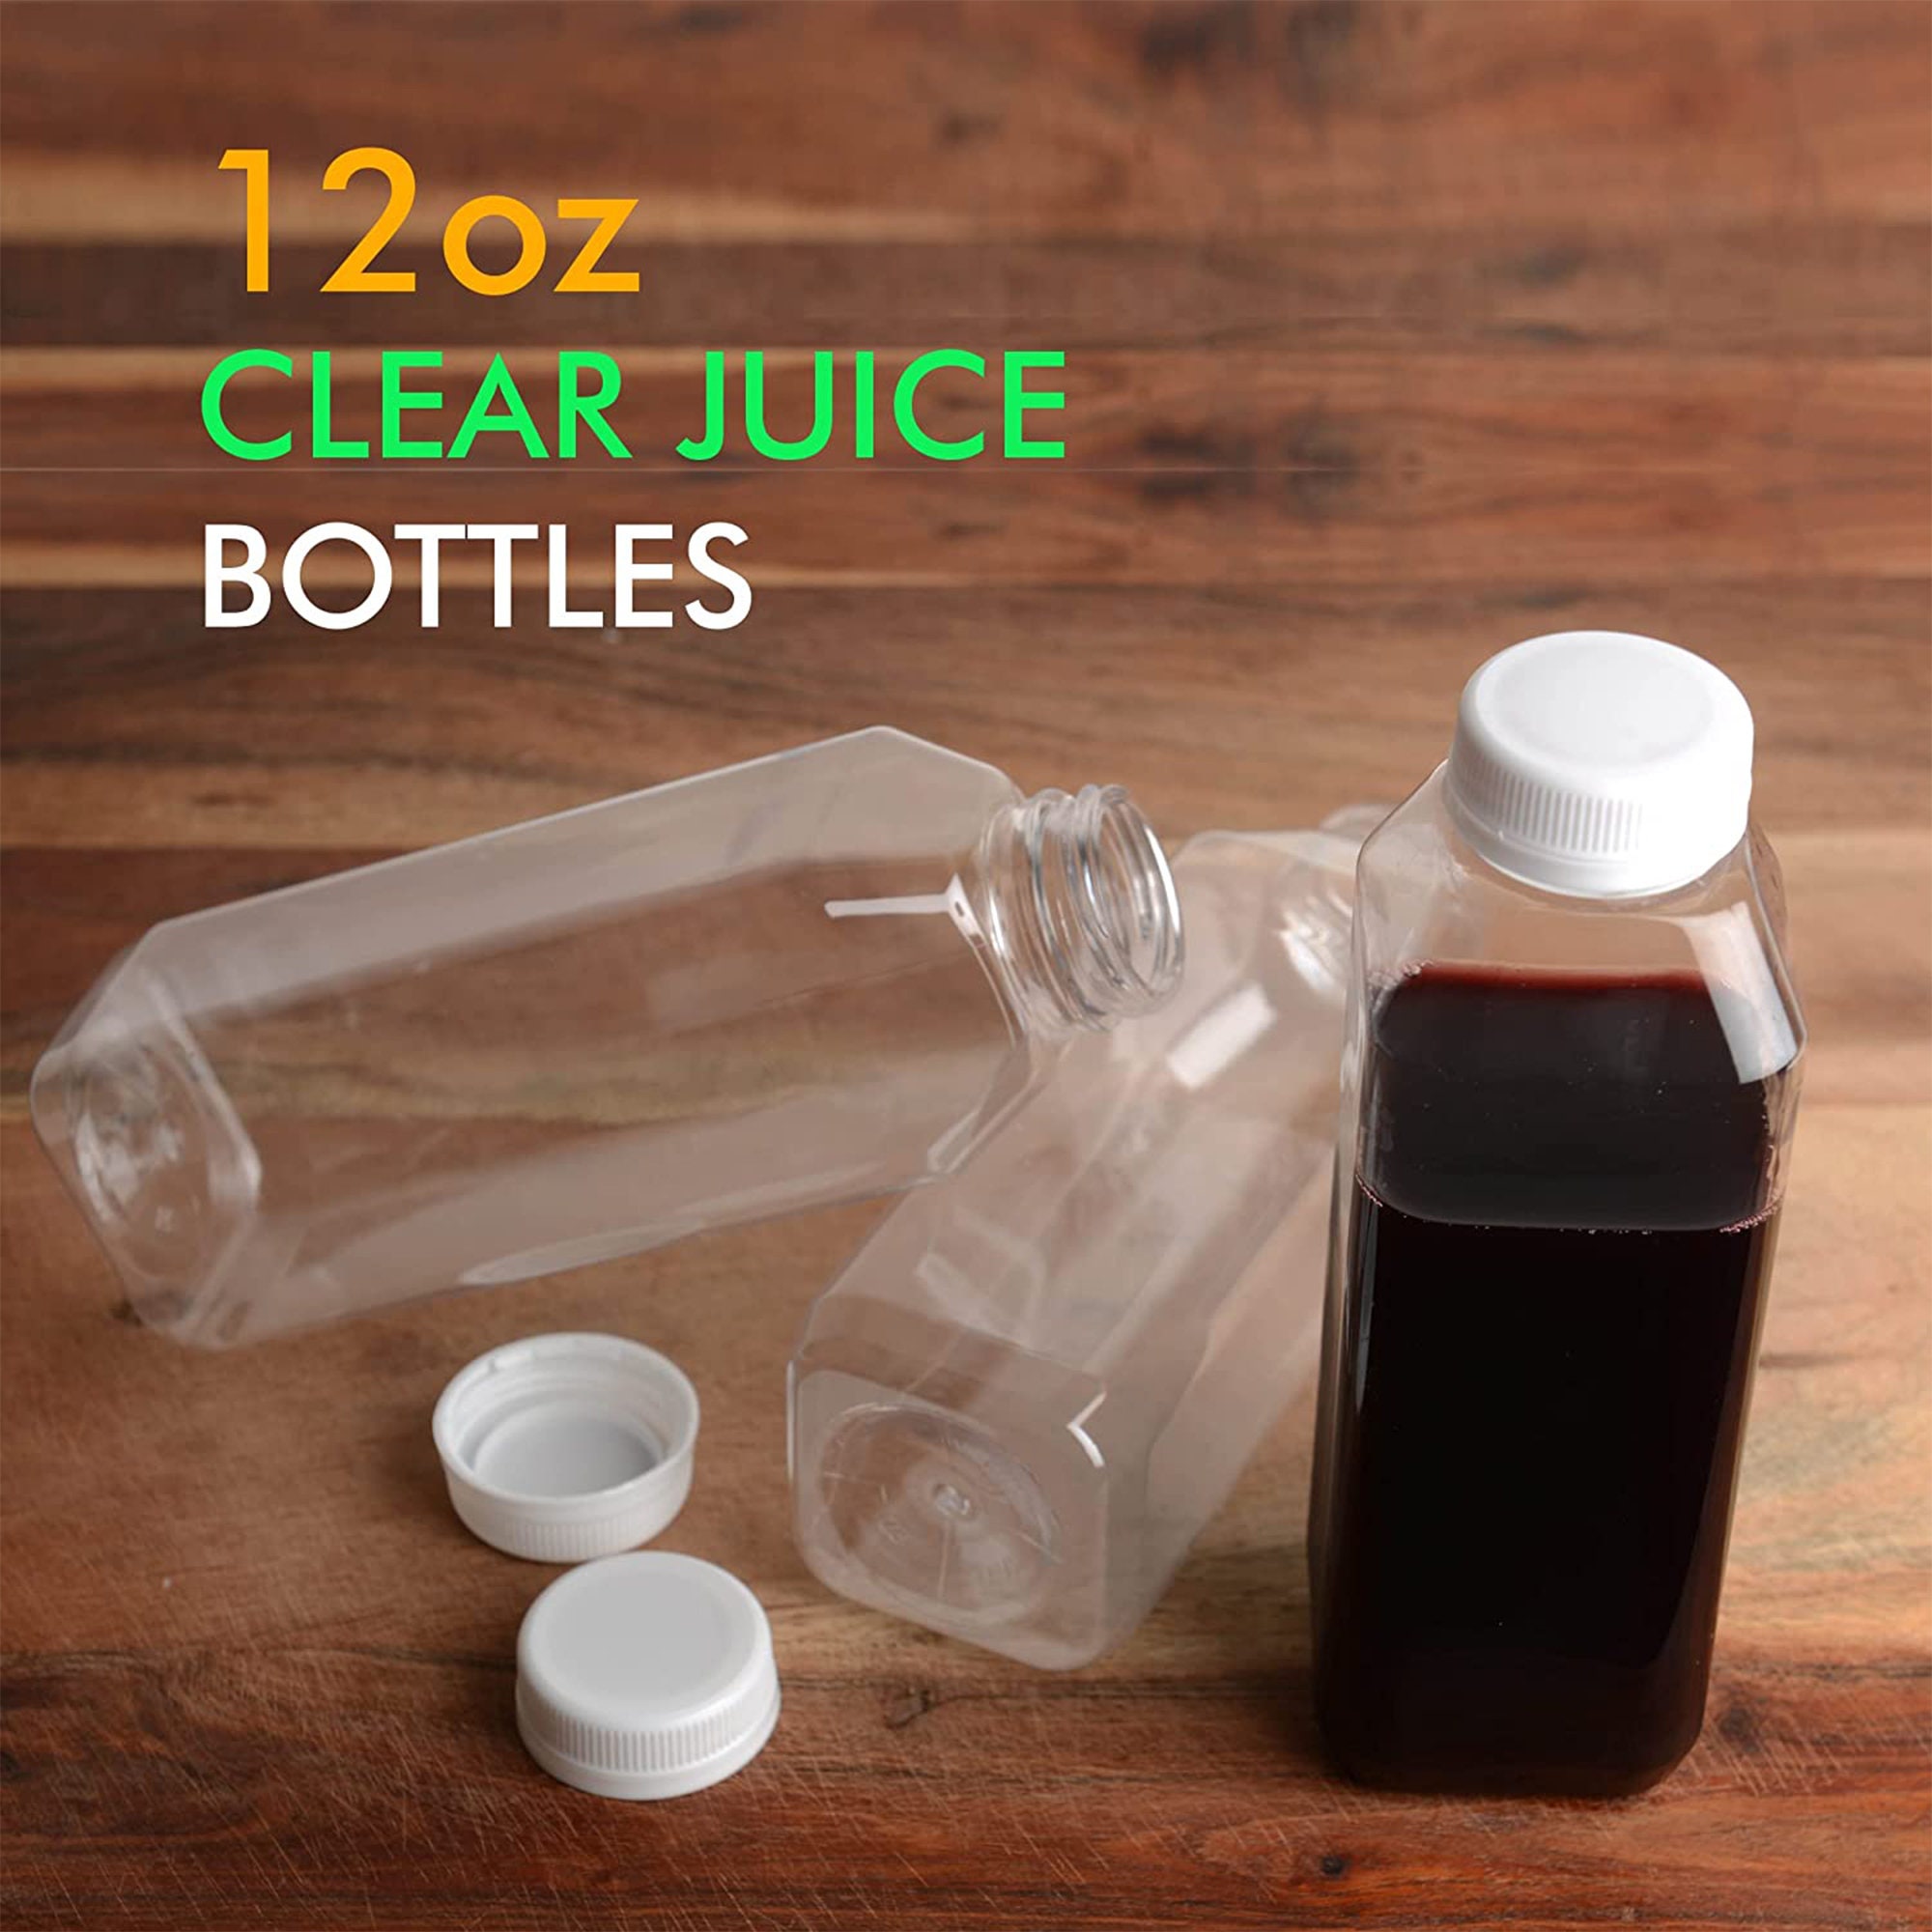 40 PACK] Empty Plastic Gallon Juice Bottles with Tamper Evident